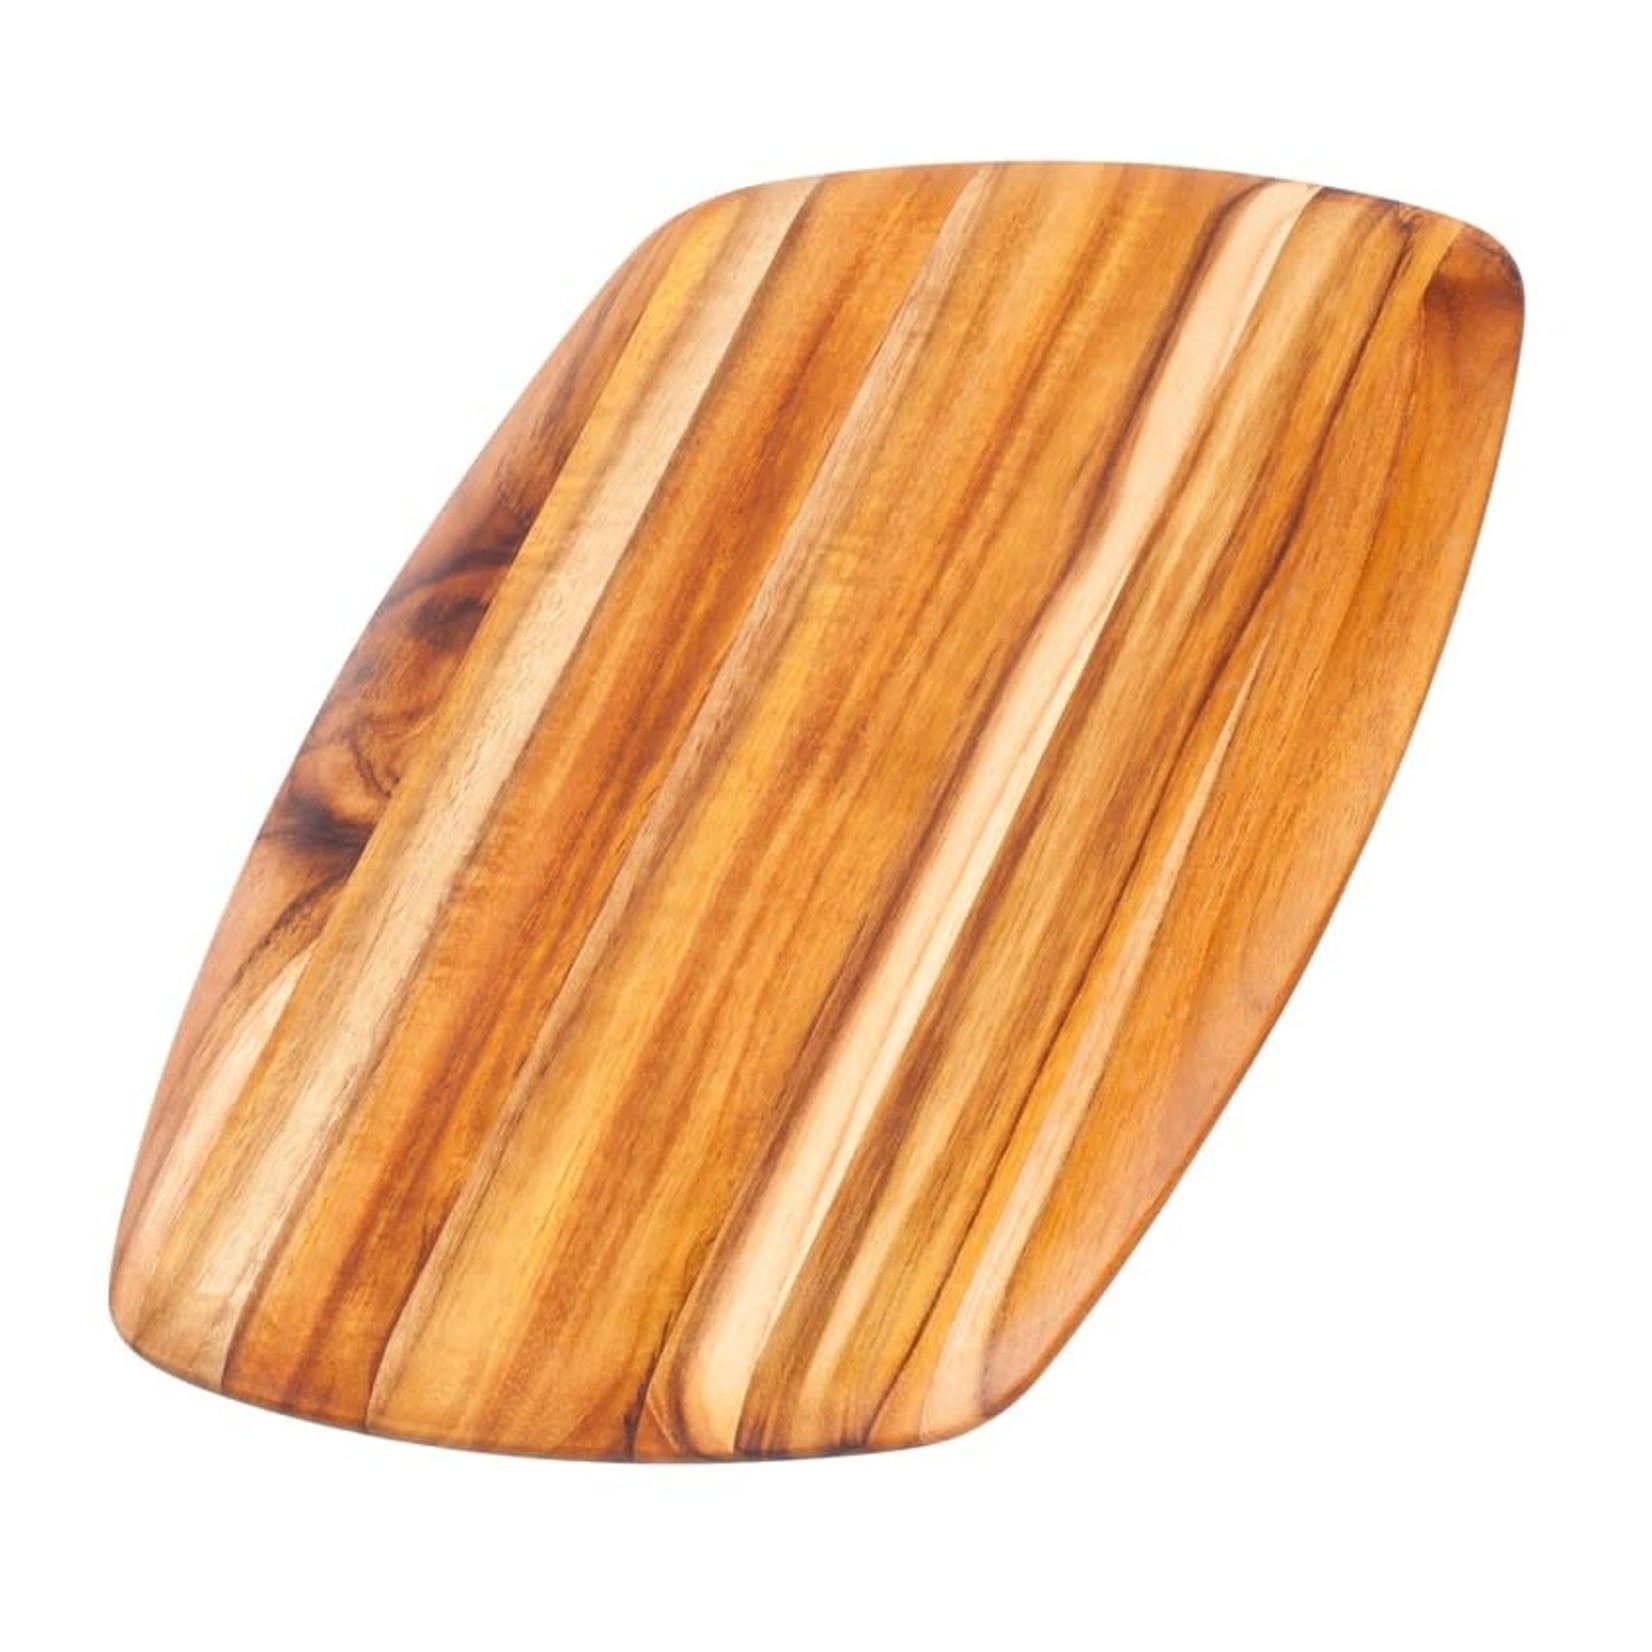 TEAKHAUS TEAKHAUS Rounded Edge Cutting / Serving Board 14x9"